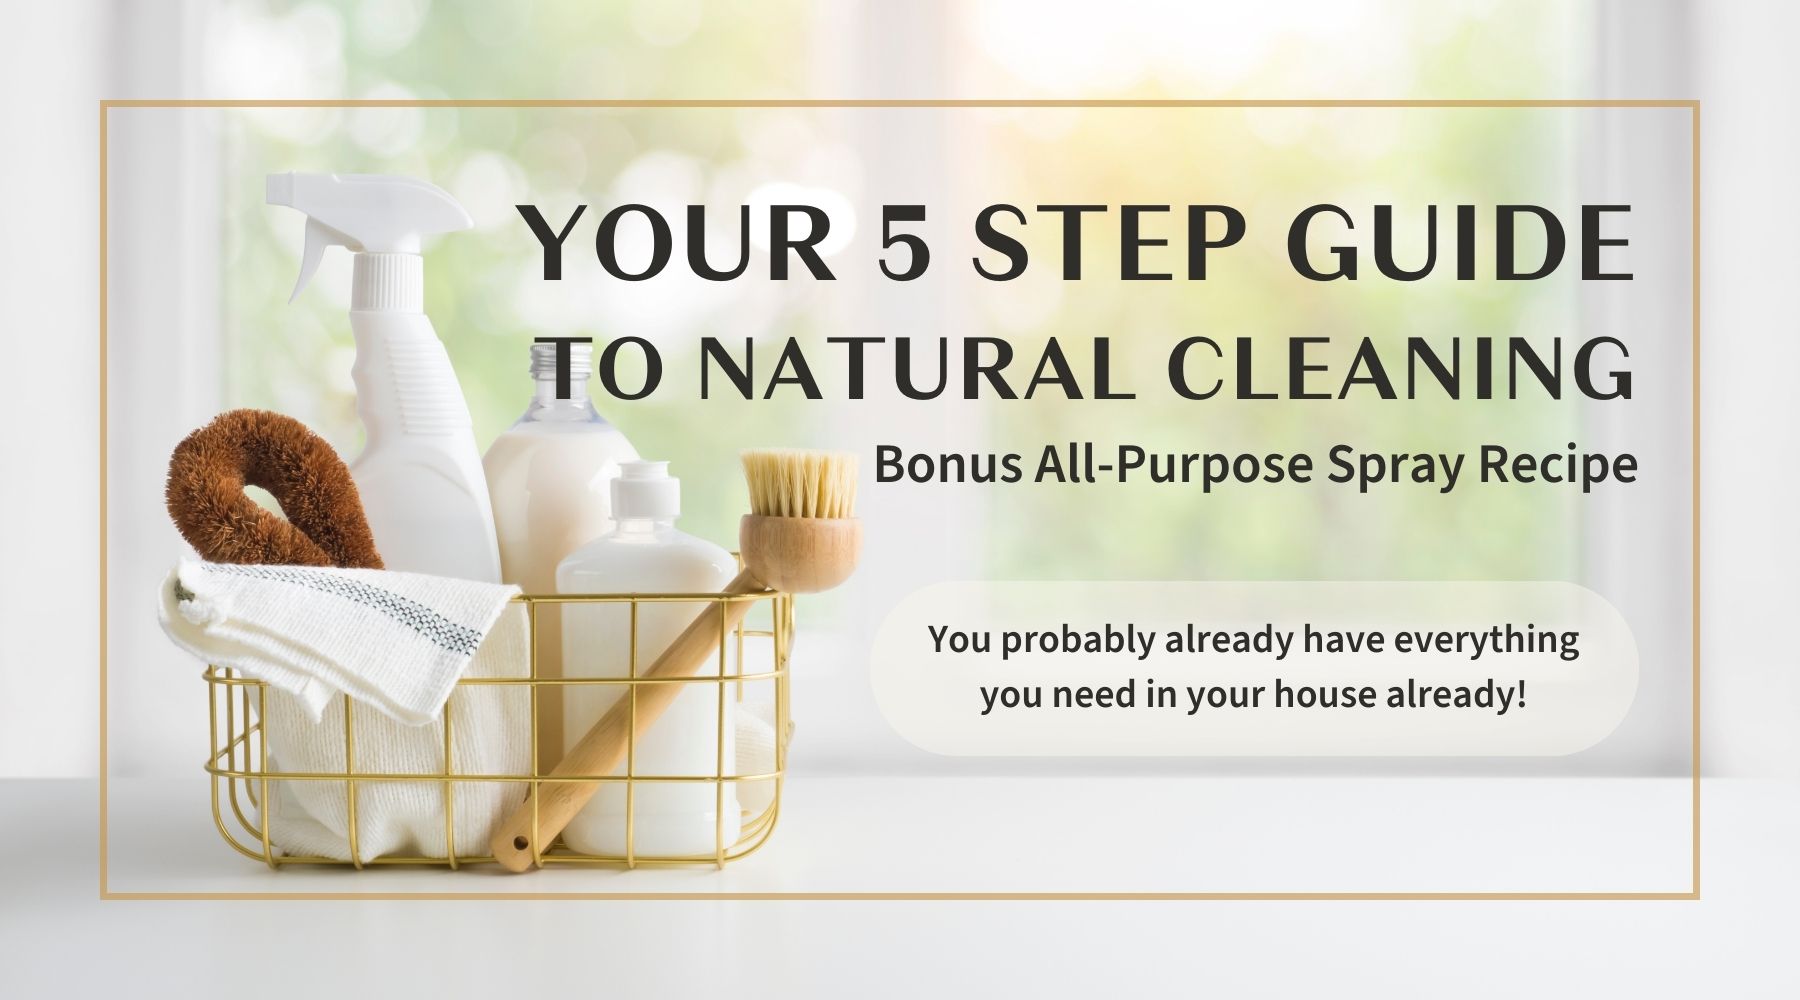 Your 5 Step Guide to Natural Cleaning + All Purpose Cleaner Recipe